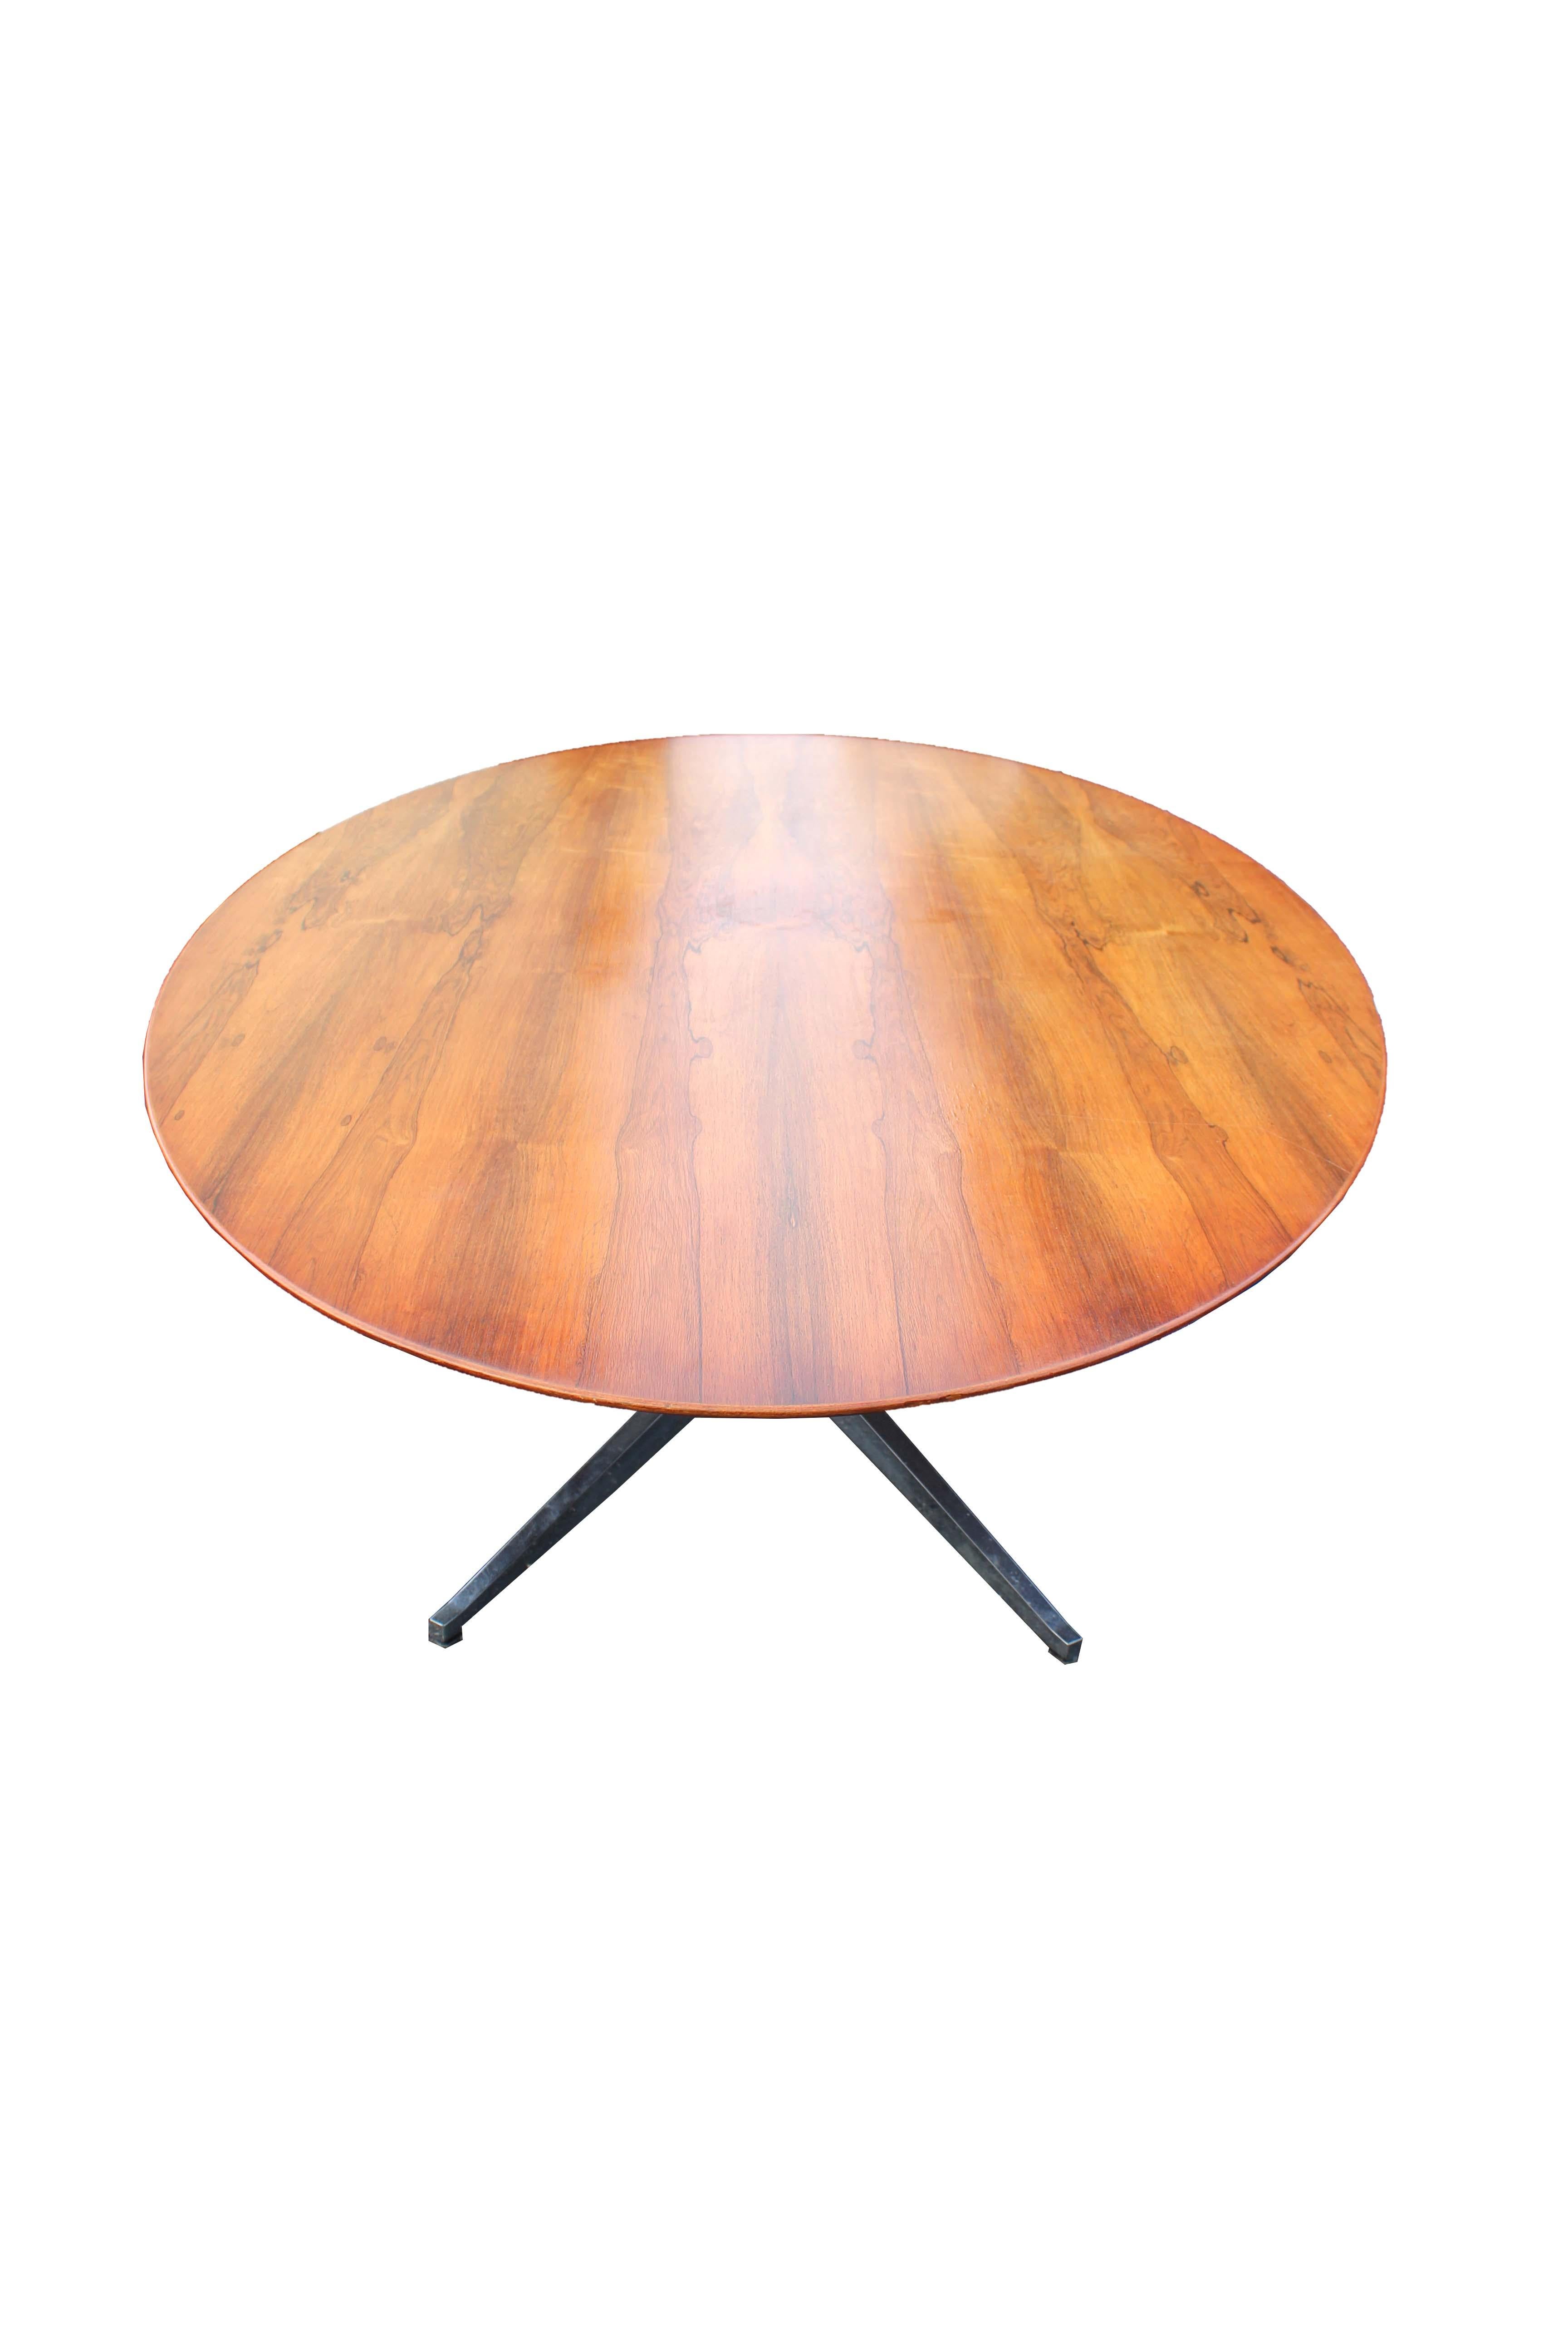 Mid-Century Modern Knoll Rosewood Oval Dining Table with Chrome Base 2